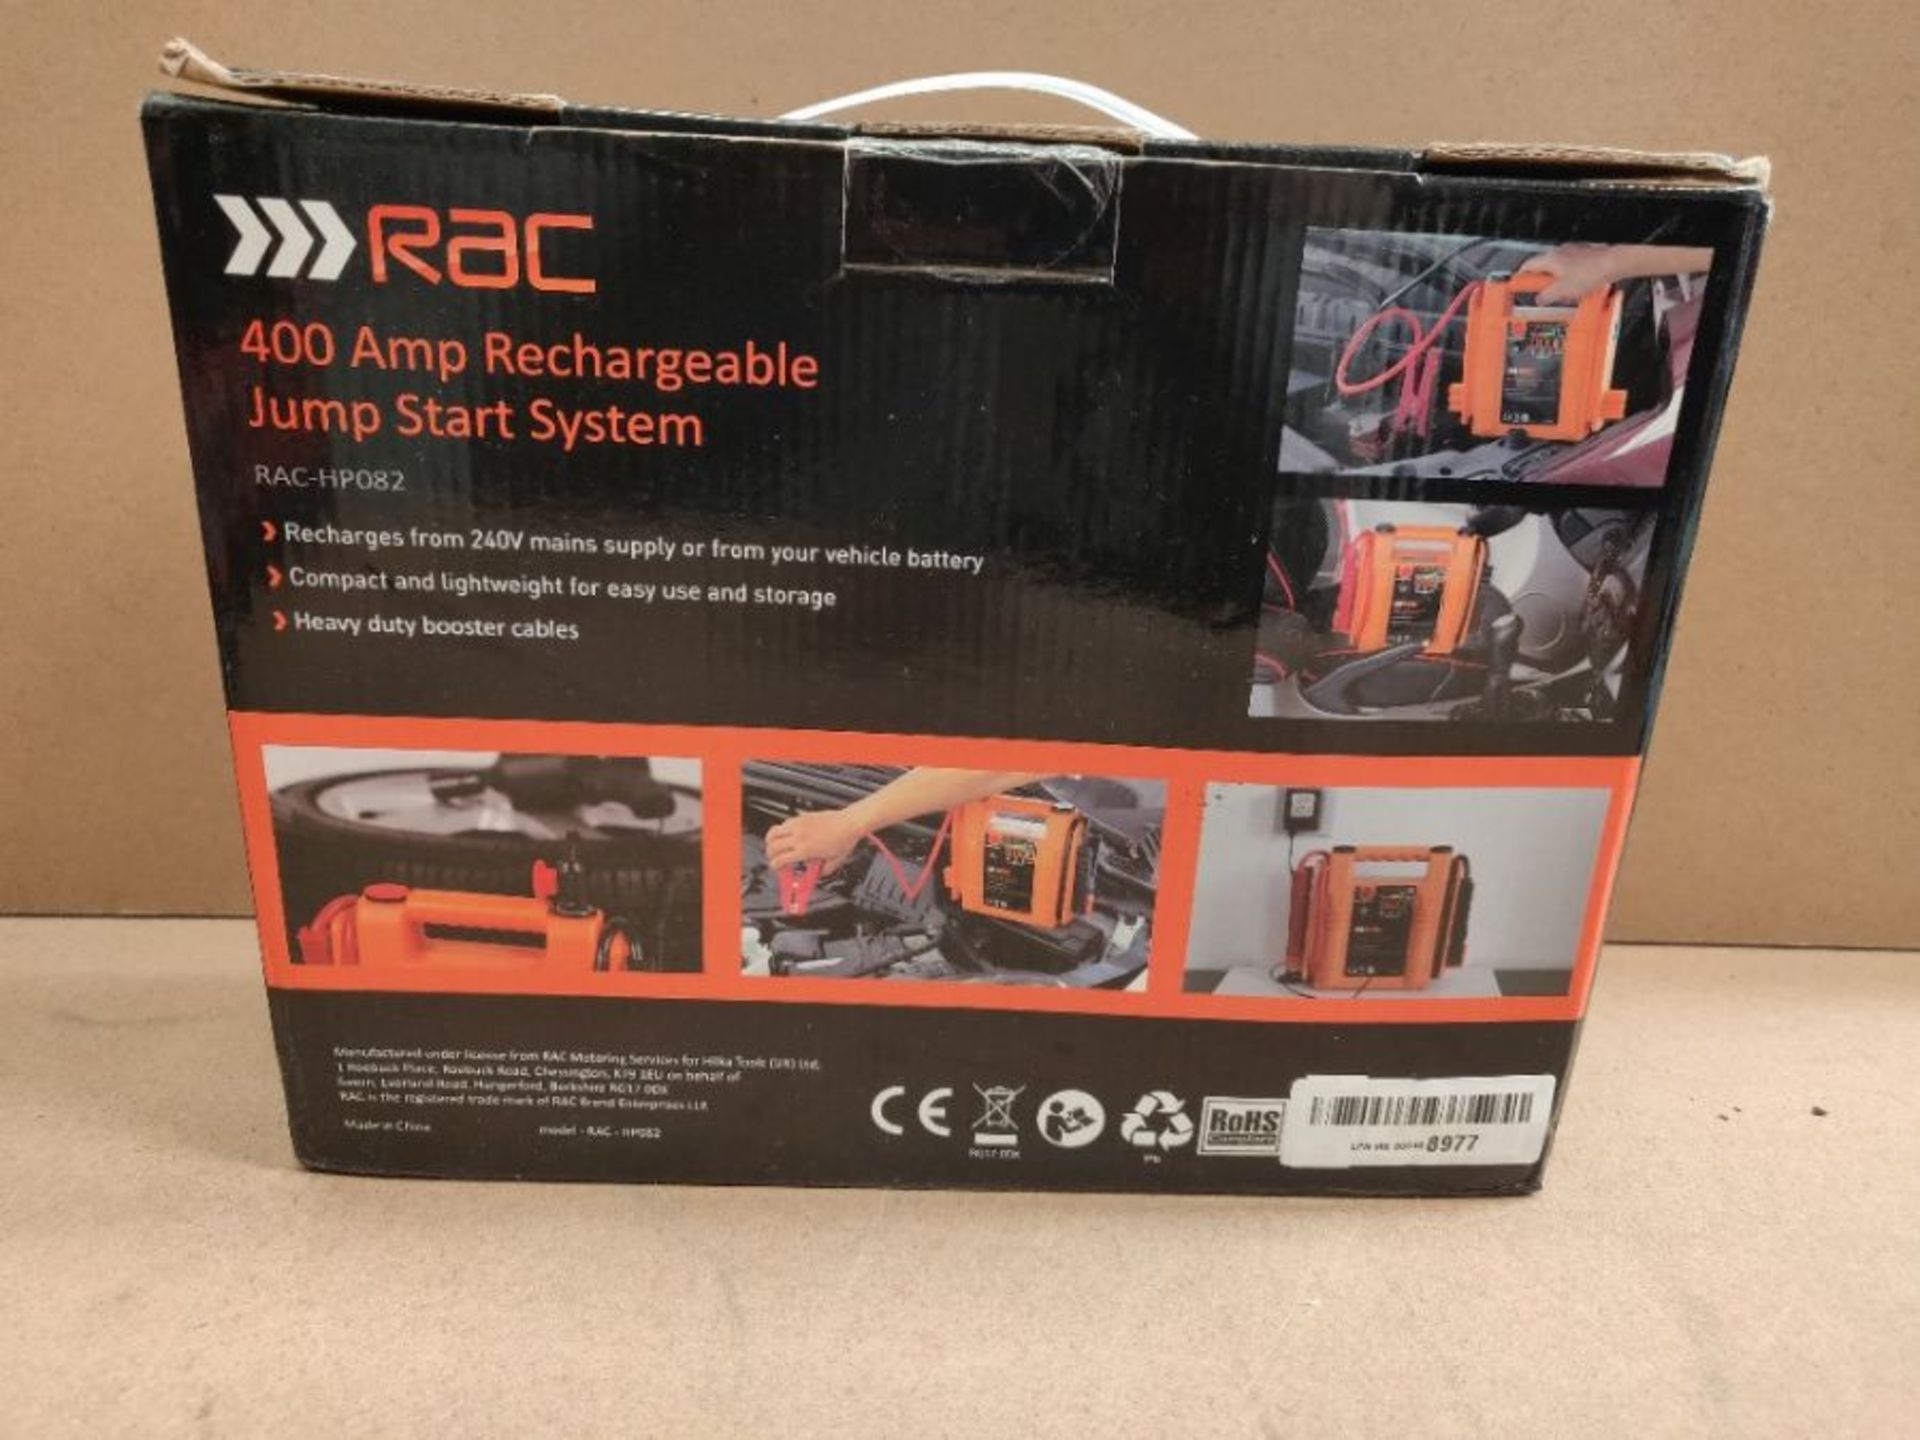 RAC 400 Amp Rechargeable Jump Start System HP082 - For Car Batteries up to 1500cc Petr - Image 2 of 3